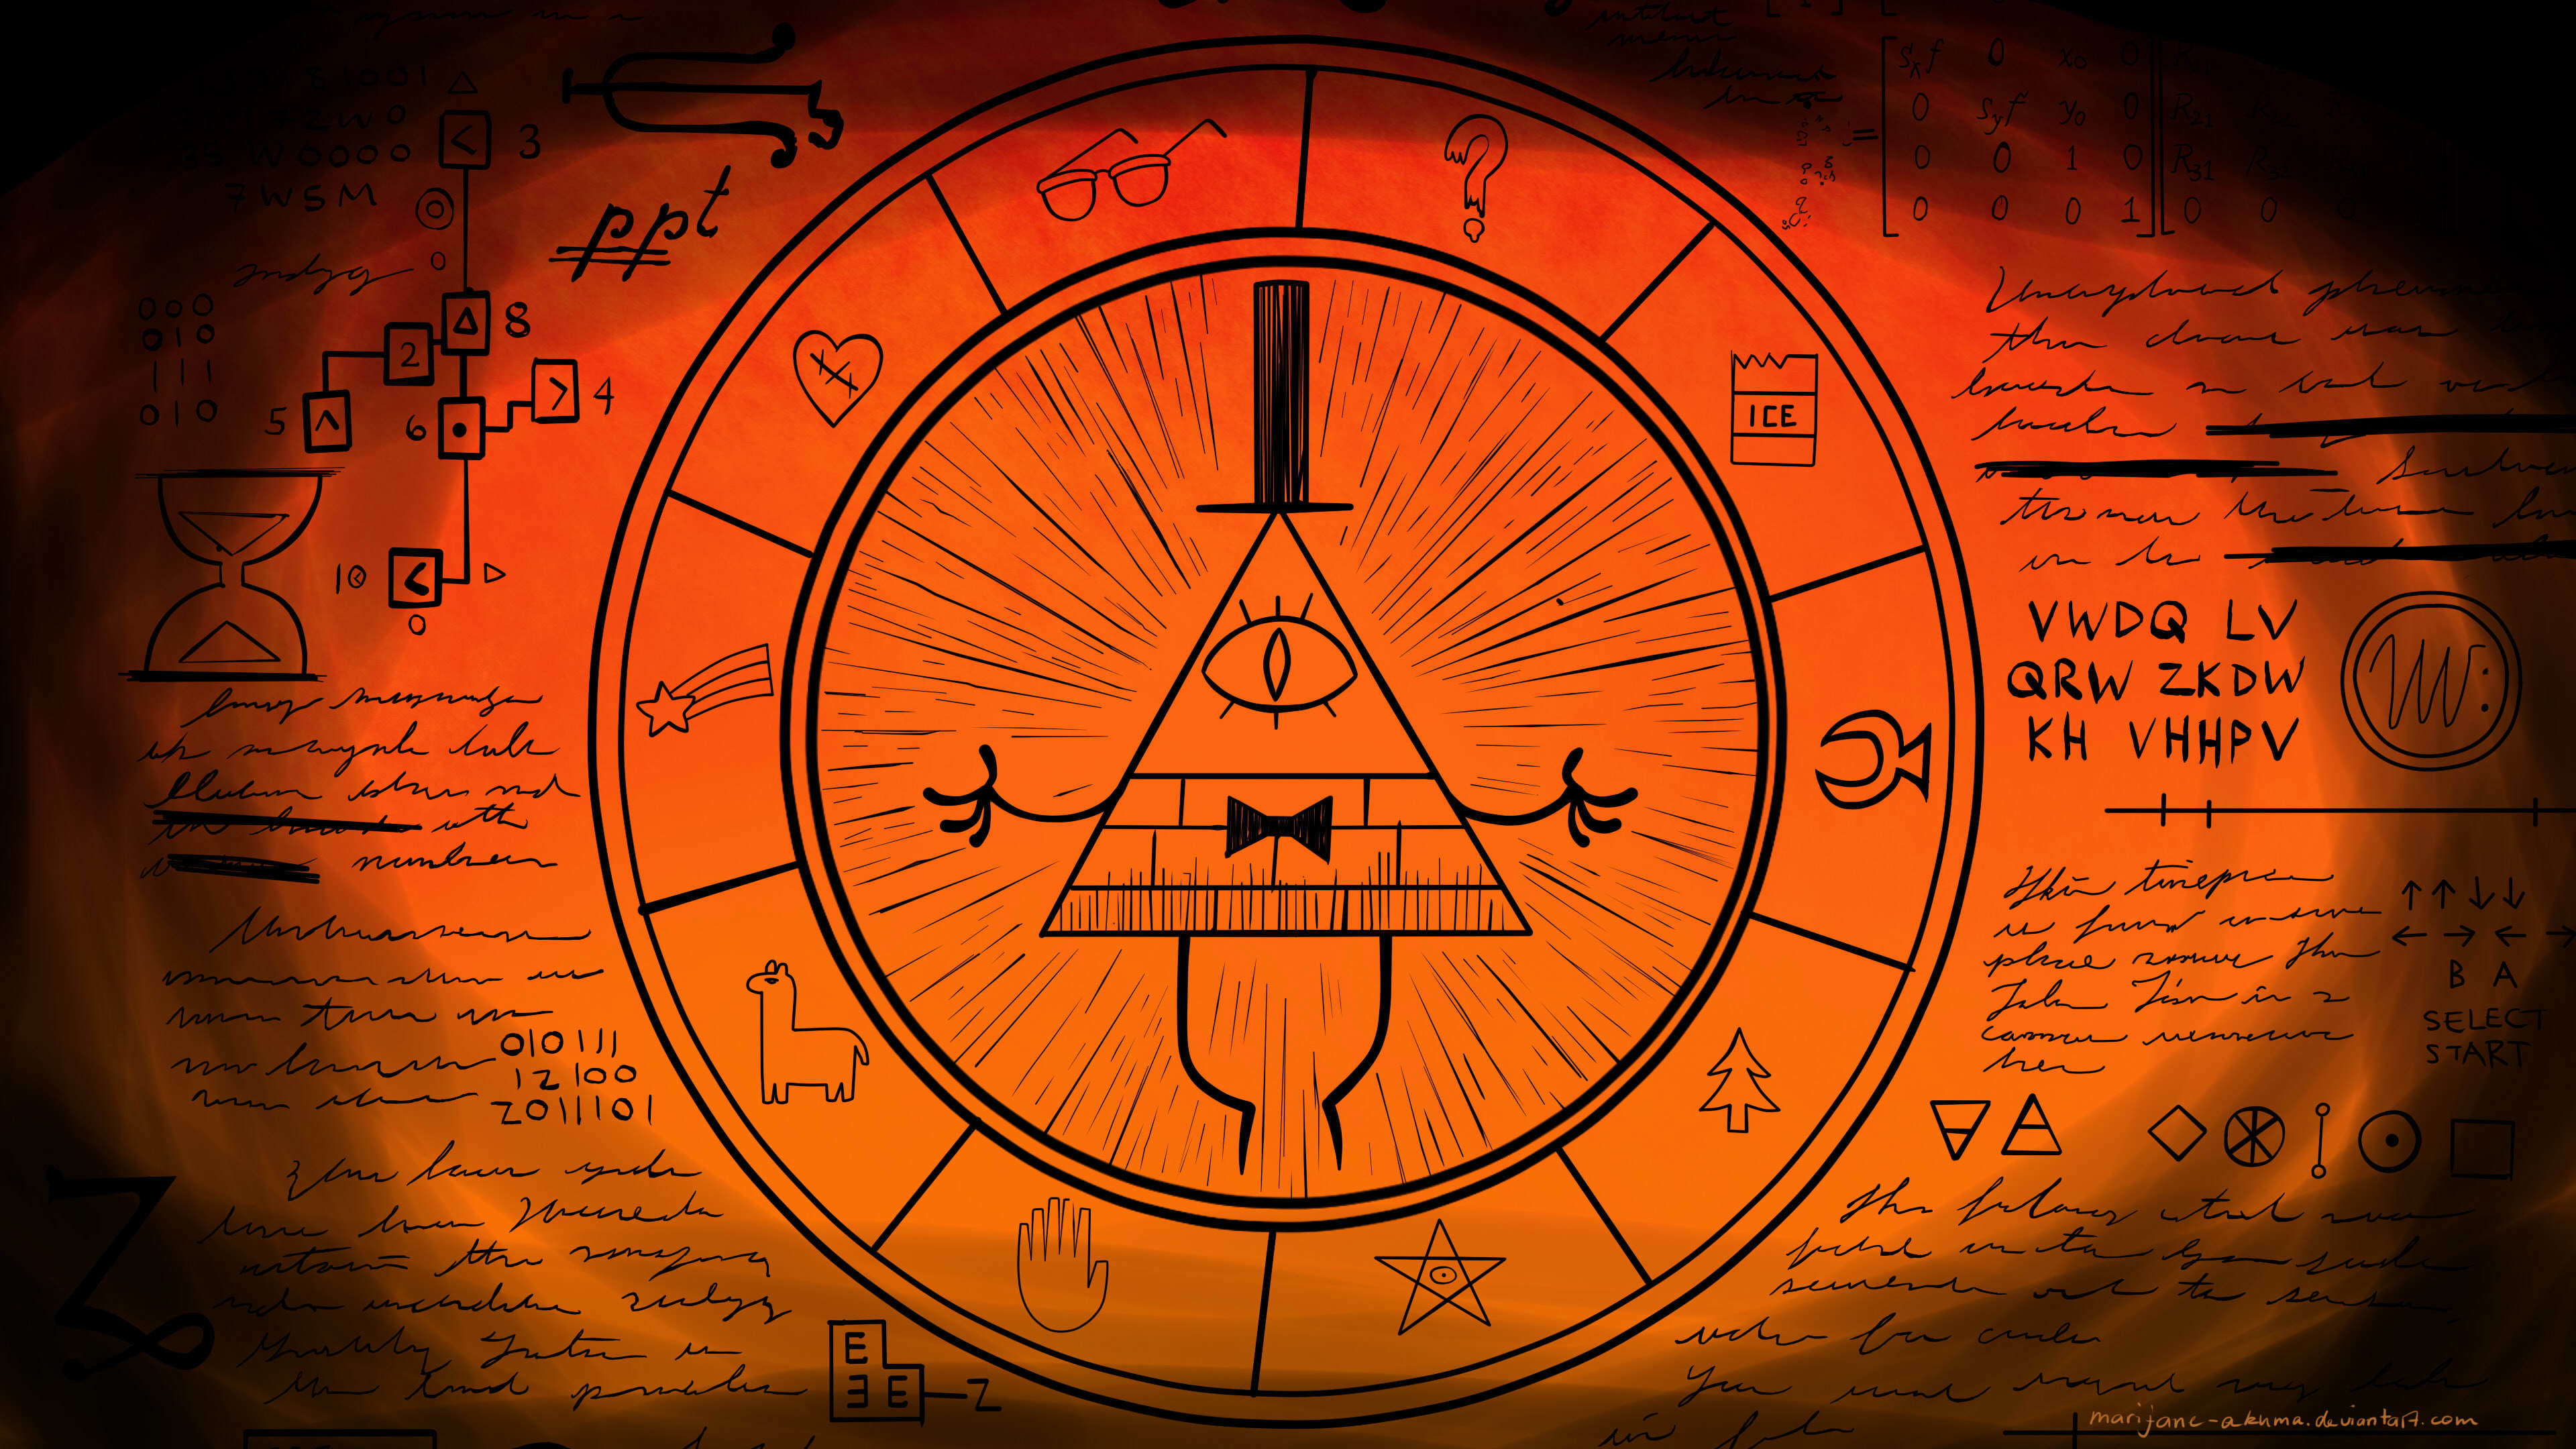 pyramid and round chart, Gravity Falls, Bill Cipher, Remember! Reality is an illusion